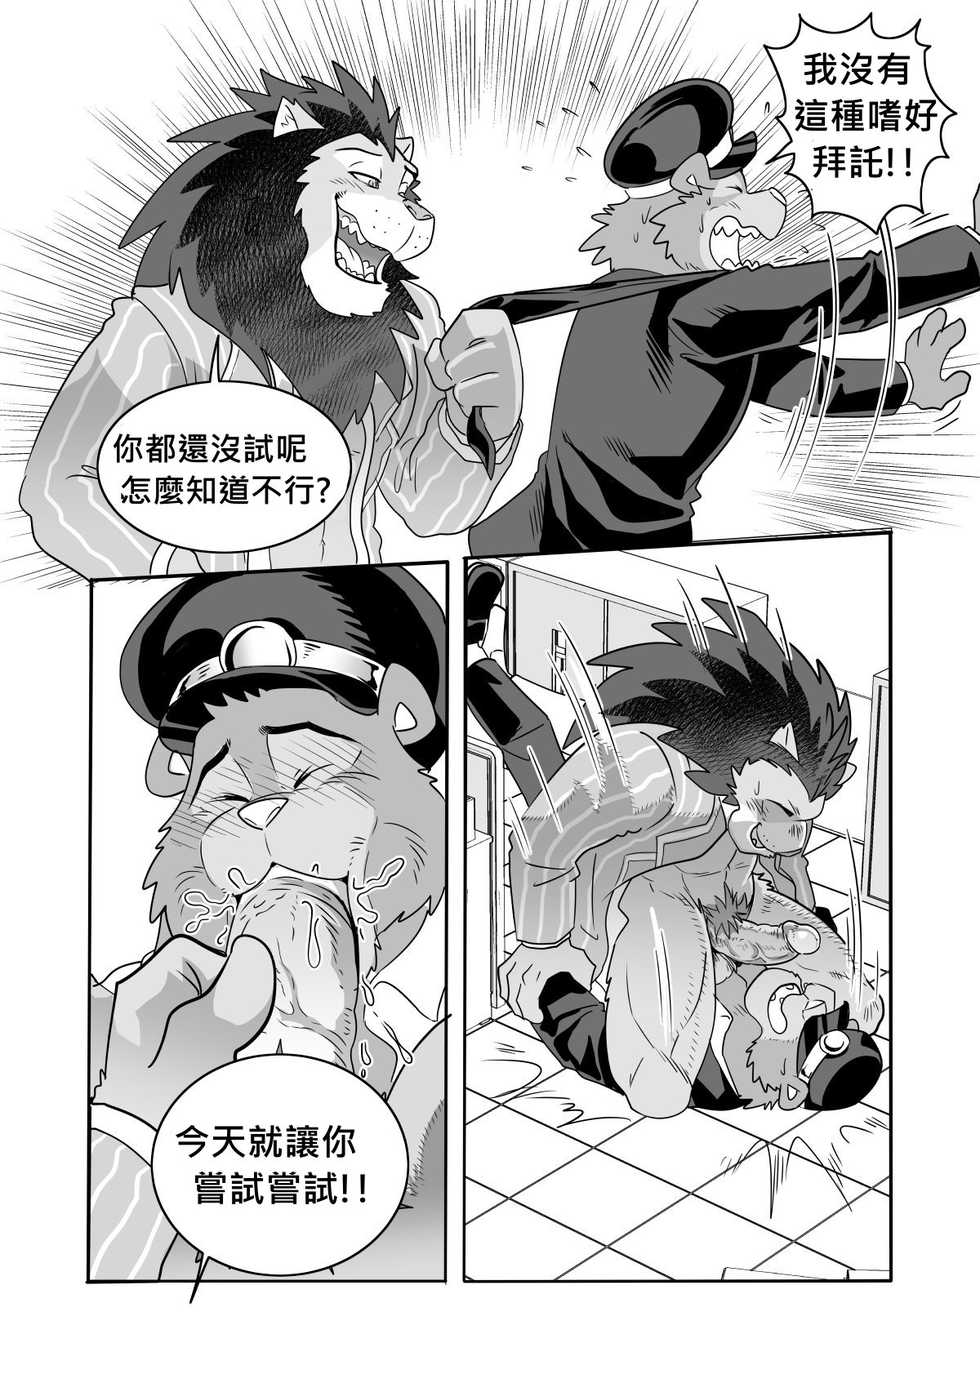 [Kuma Hachi] chief bogo found a dirty police (fixed version) [Chinese] - Page 25